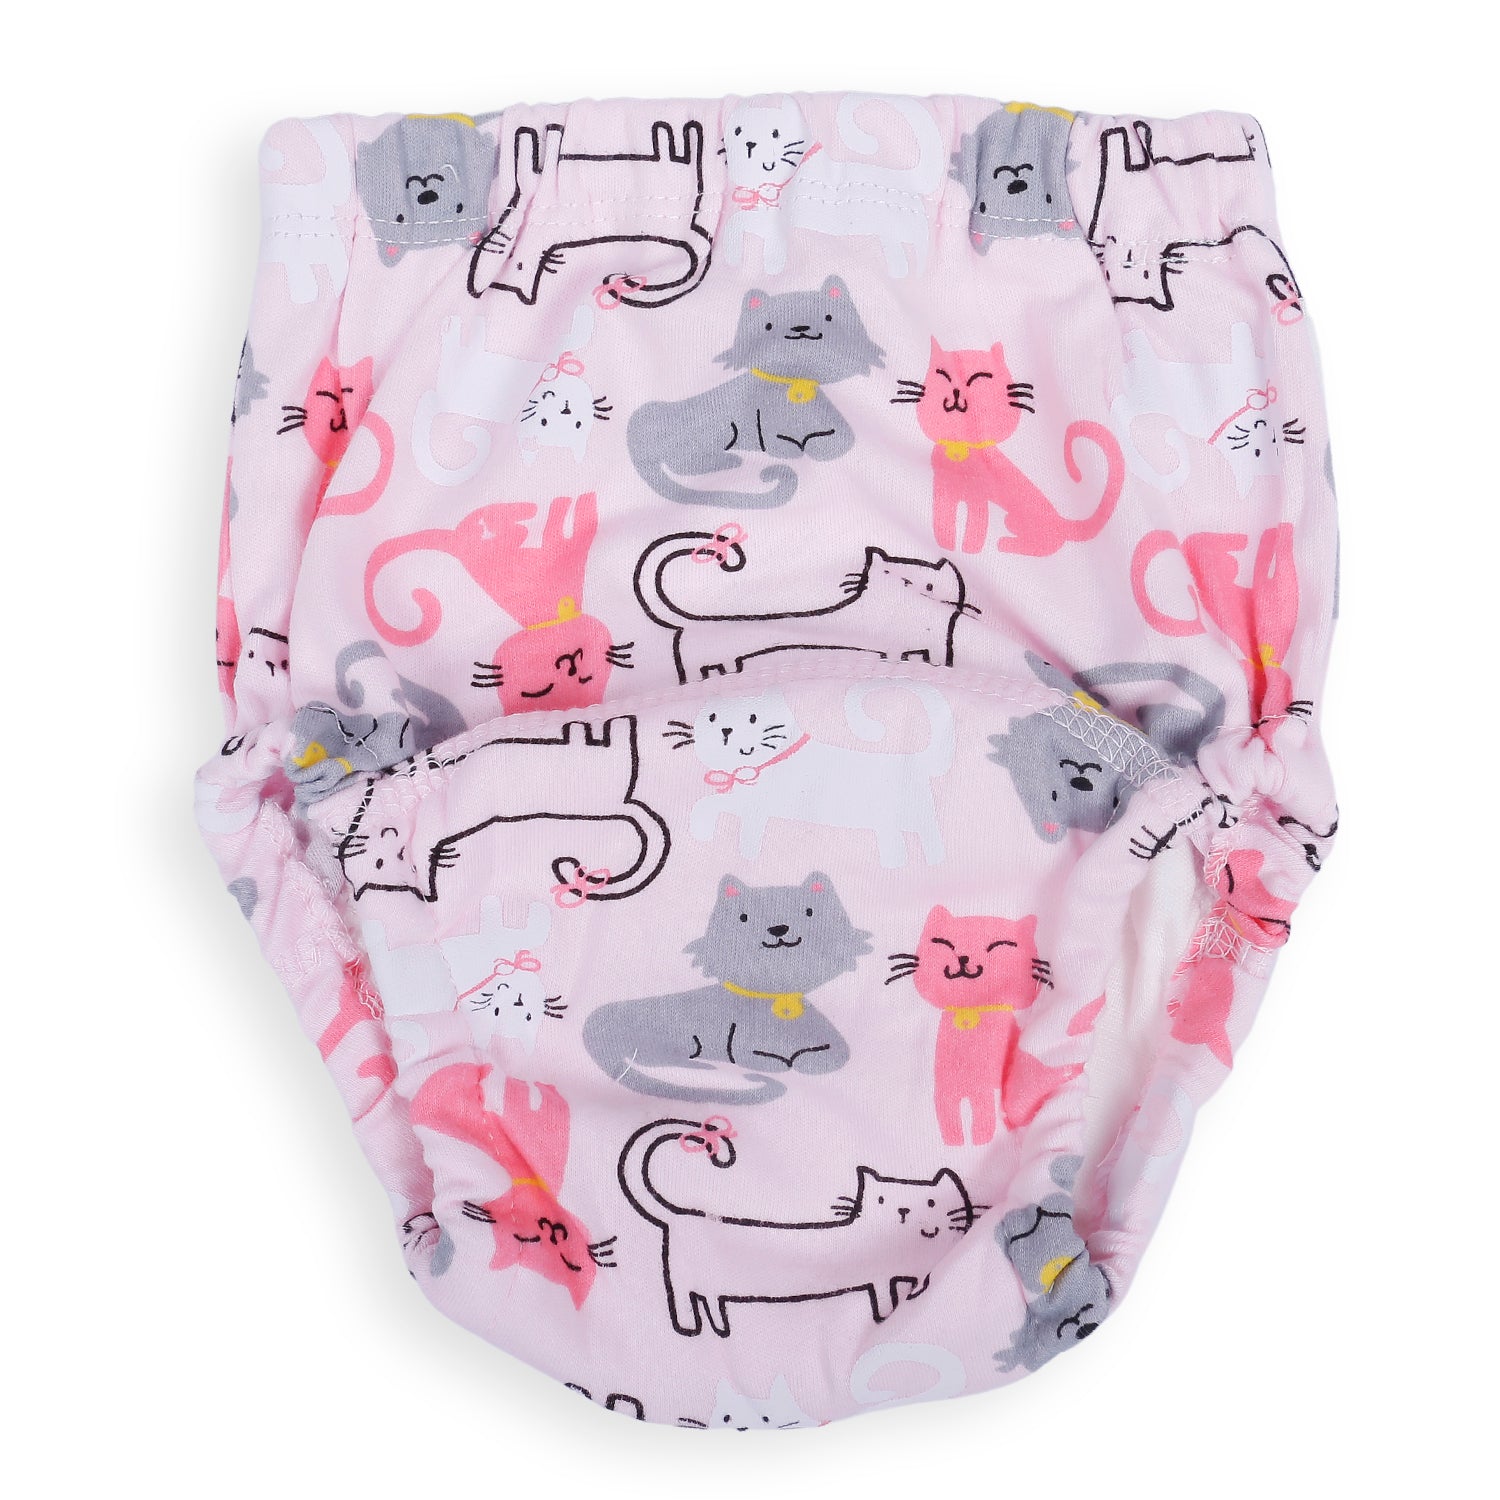 Buy Ole Baby Reusable Cloth Diaper Pull on Style Diaper Pants (Age:0-1  Years) Online at Low Prices in India - Amazon.in